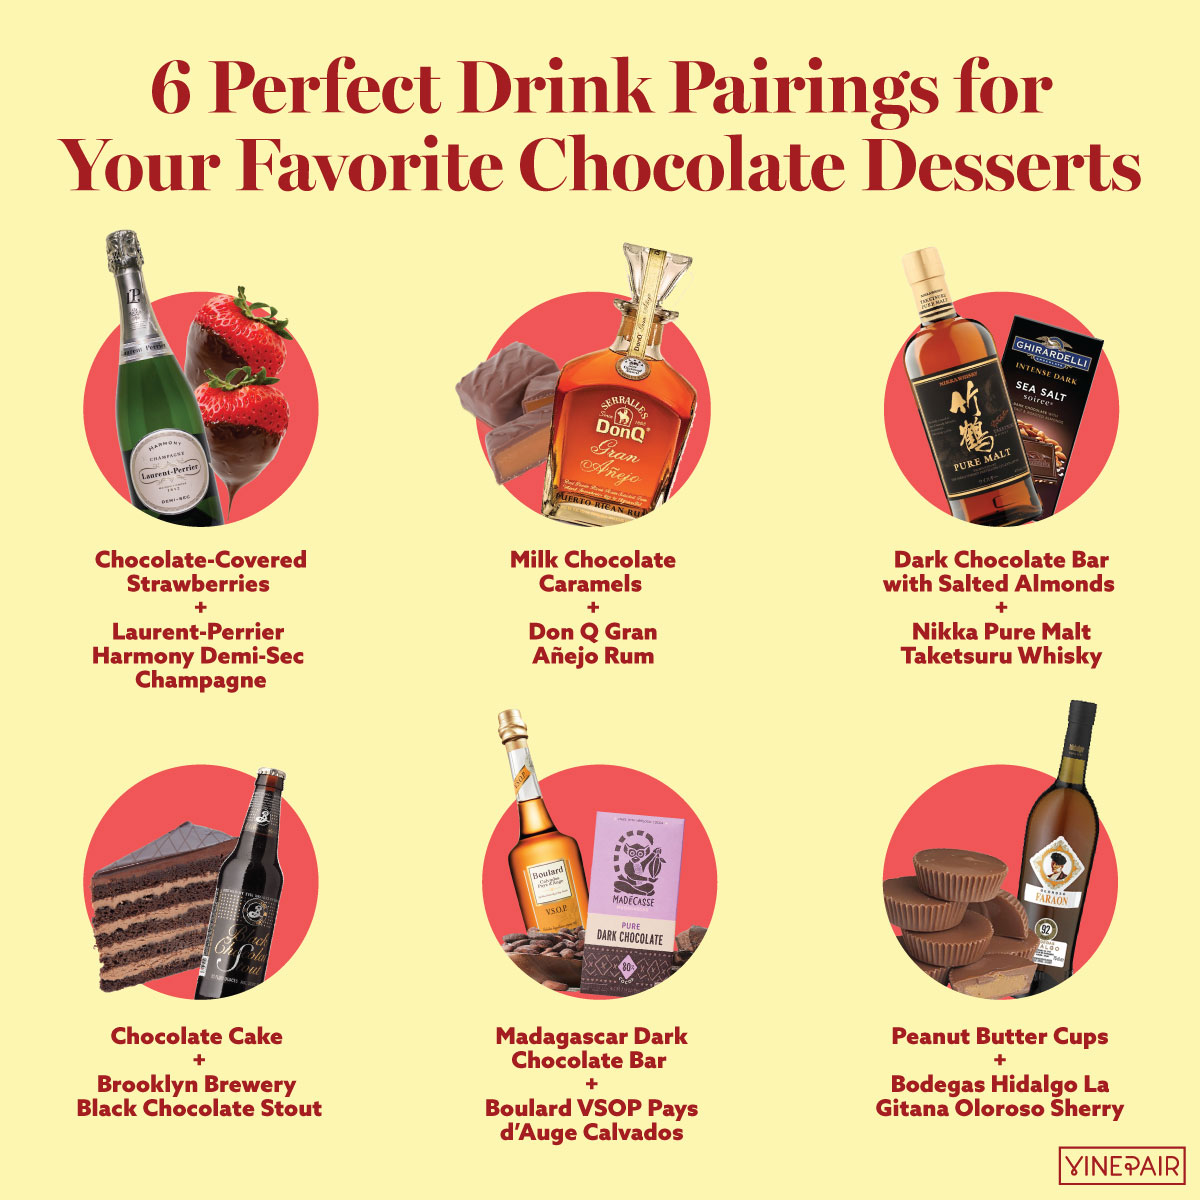 6 Perfect Drink Pairings for Chocolate